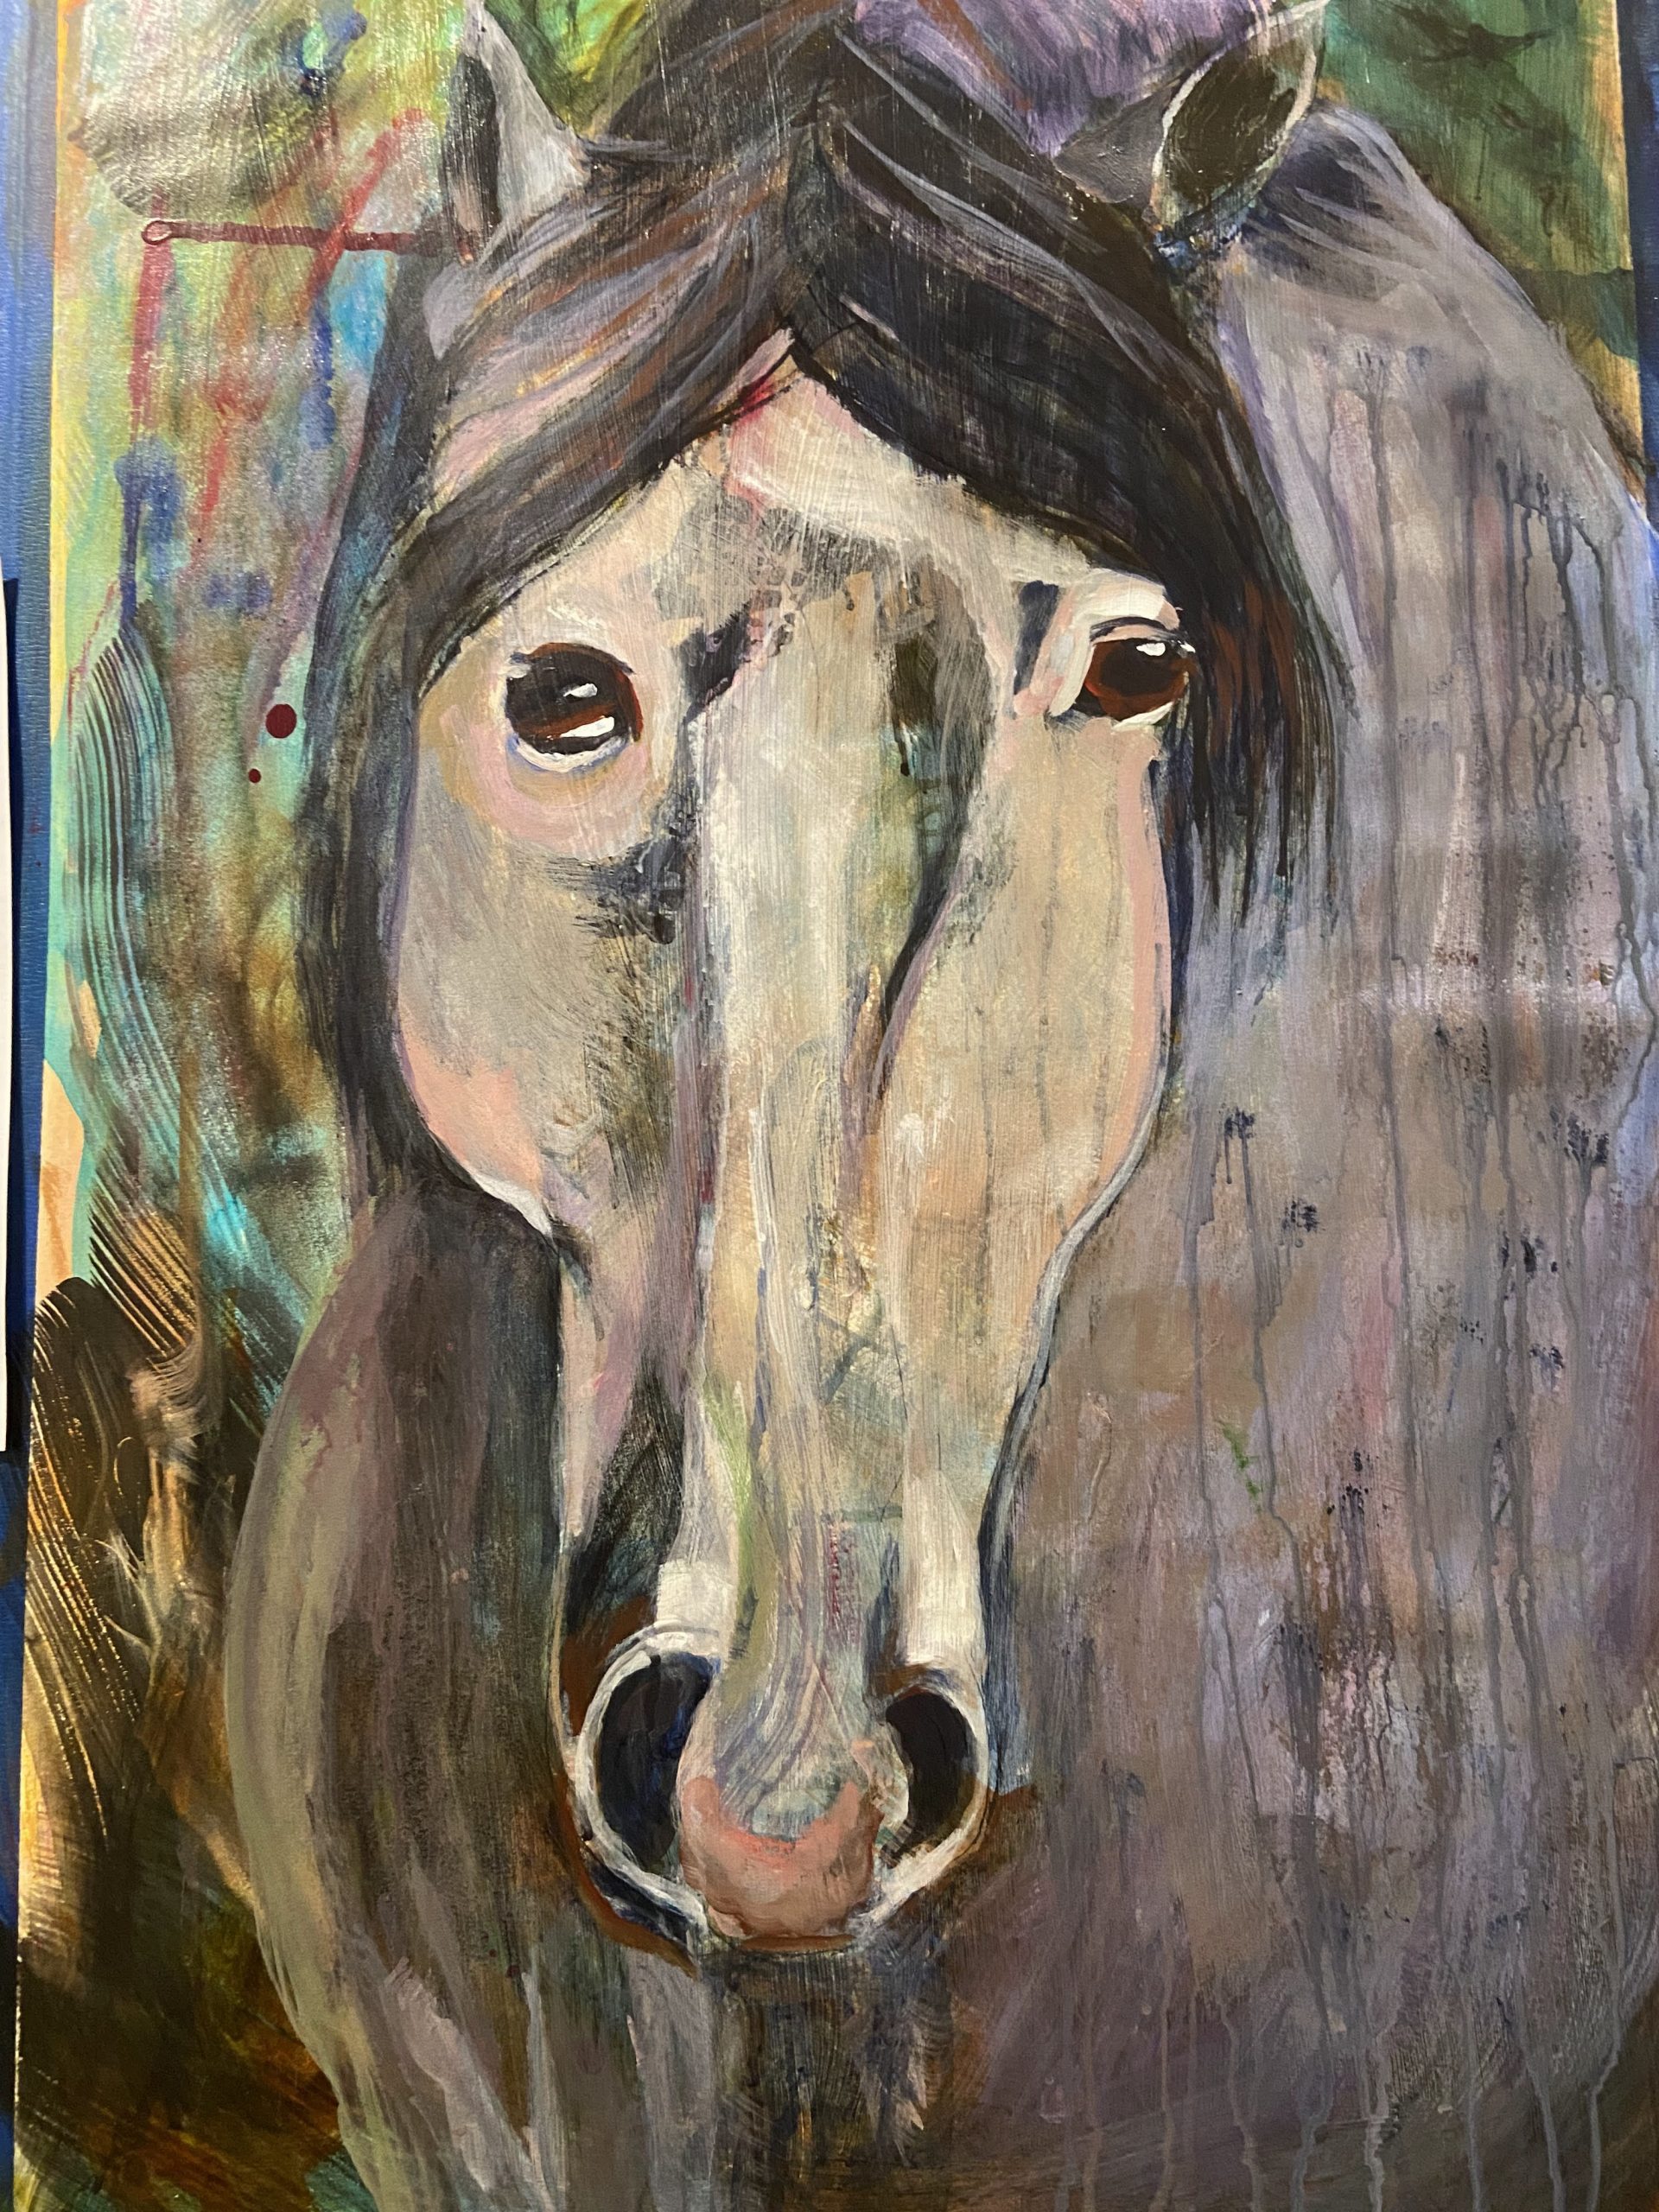 Painting of a grey horse done in acrylics on an abstract background